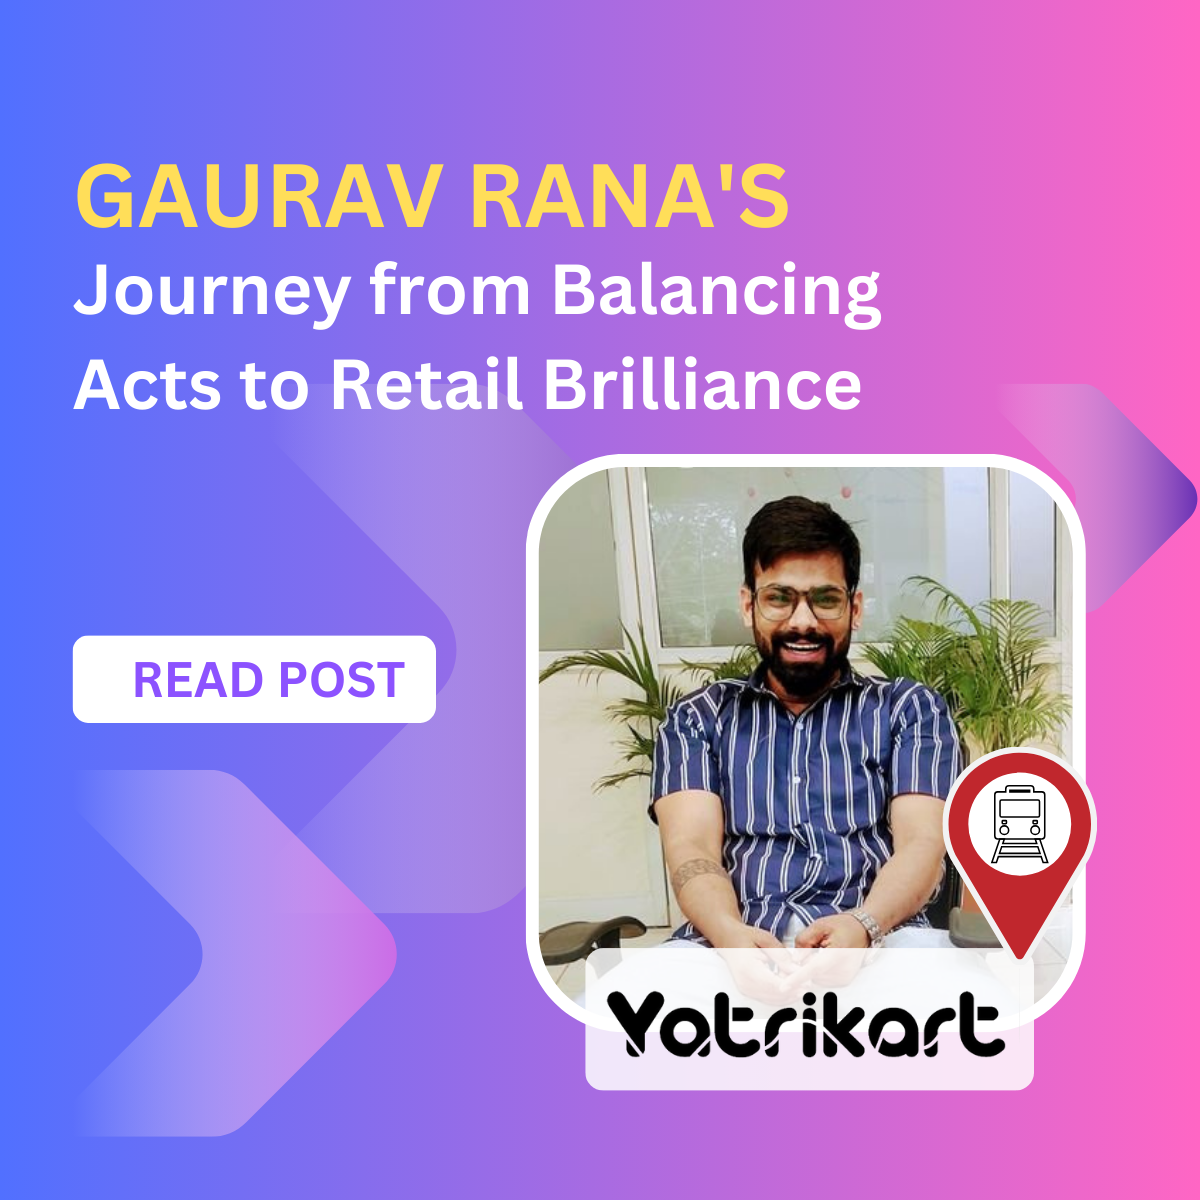 Journey From Balancing acts to retail brilliance